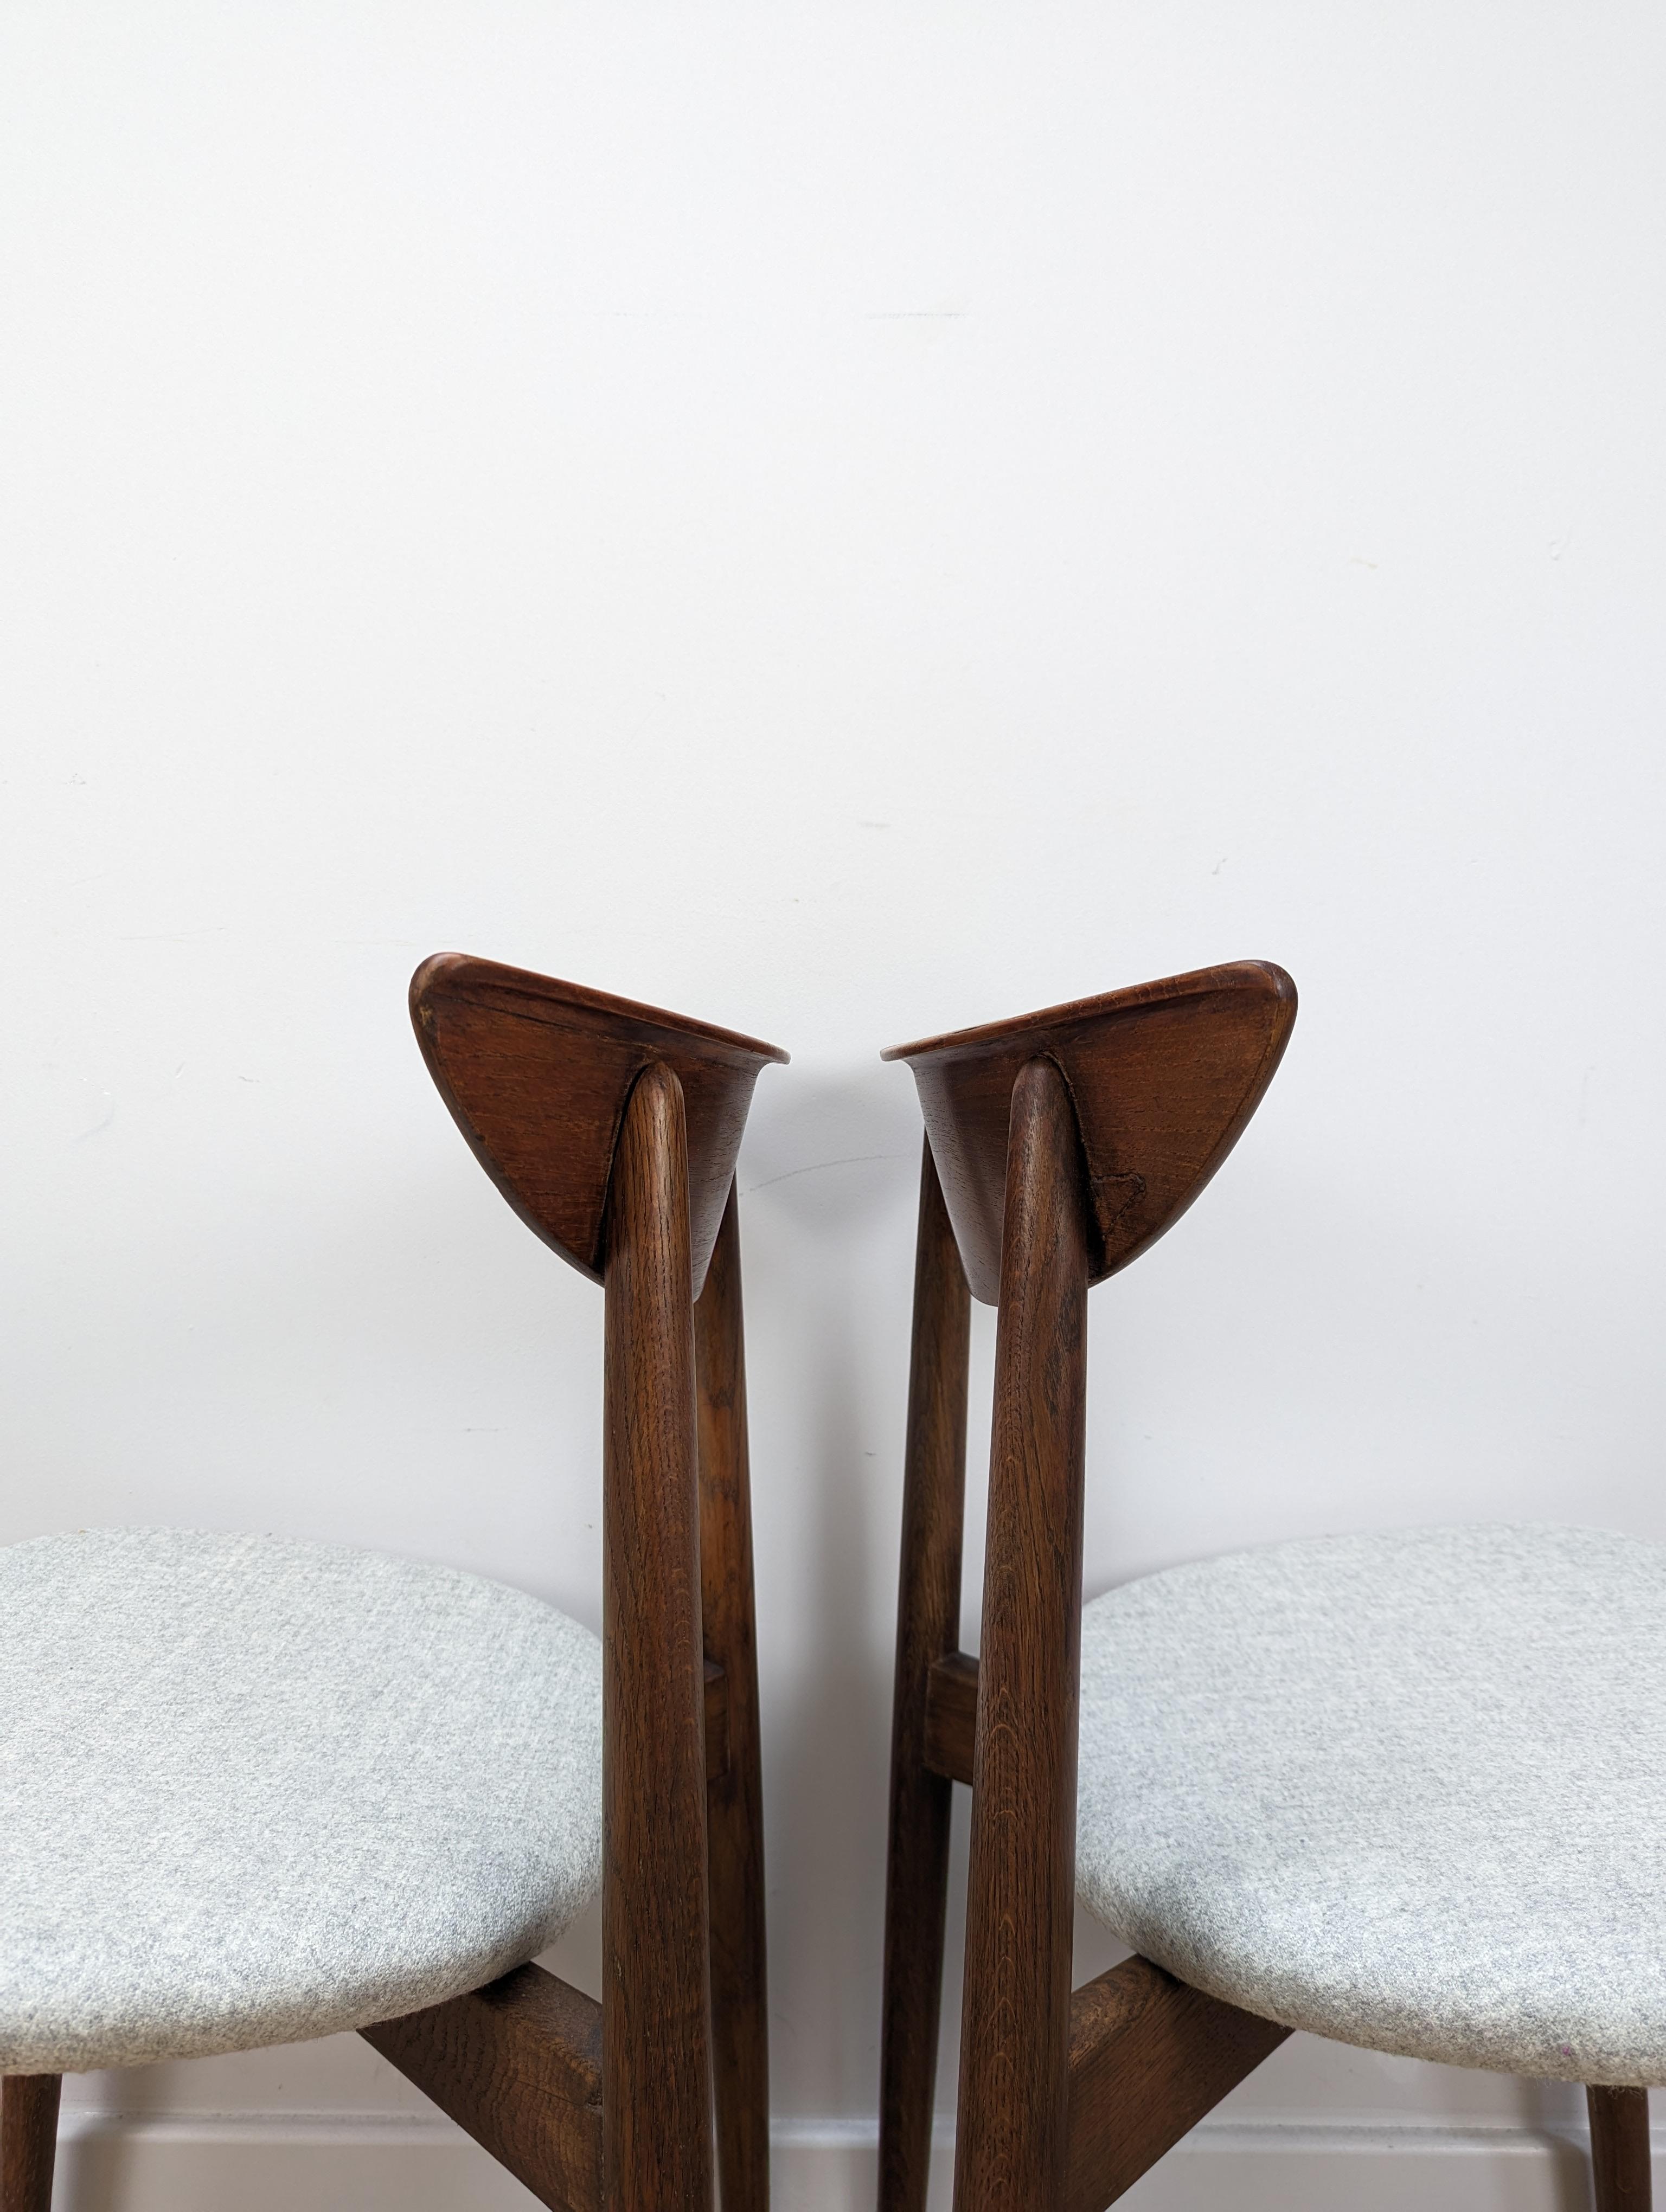 This pair of teak Harry Østergaard designed chairs for Randers Møbelfabrik are timeless with a beautifully sculptured back and splayed legs. The result is an elegant chair that is incredibly comfortable to sit on.

The chairs have been fully